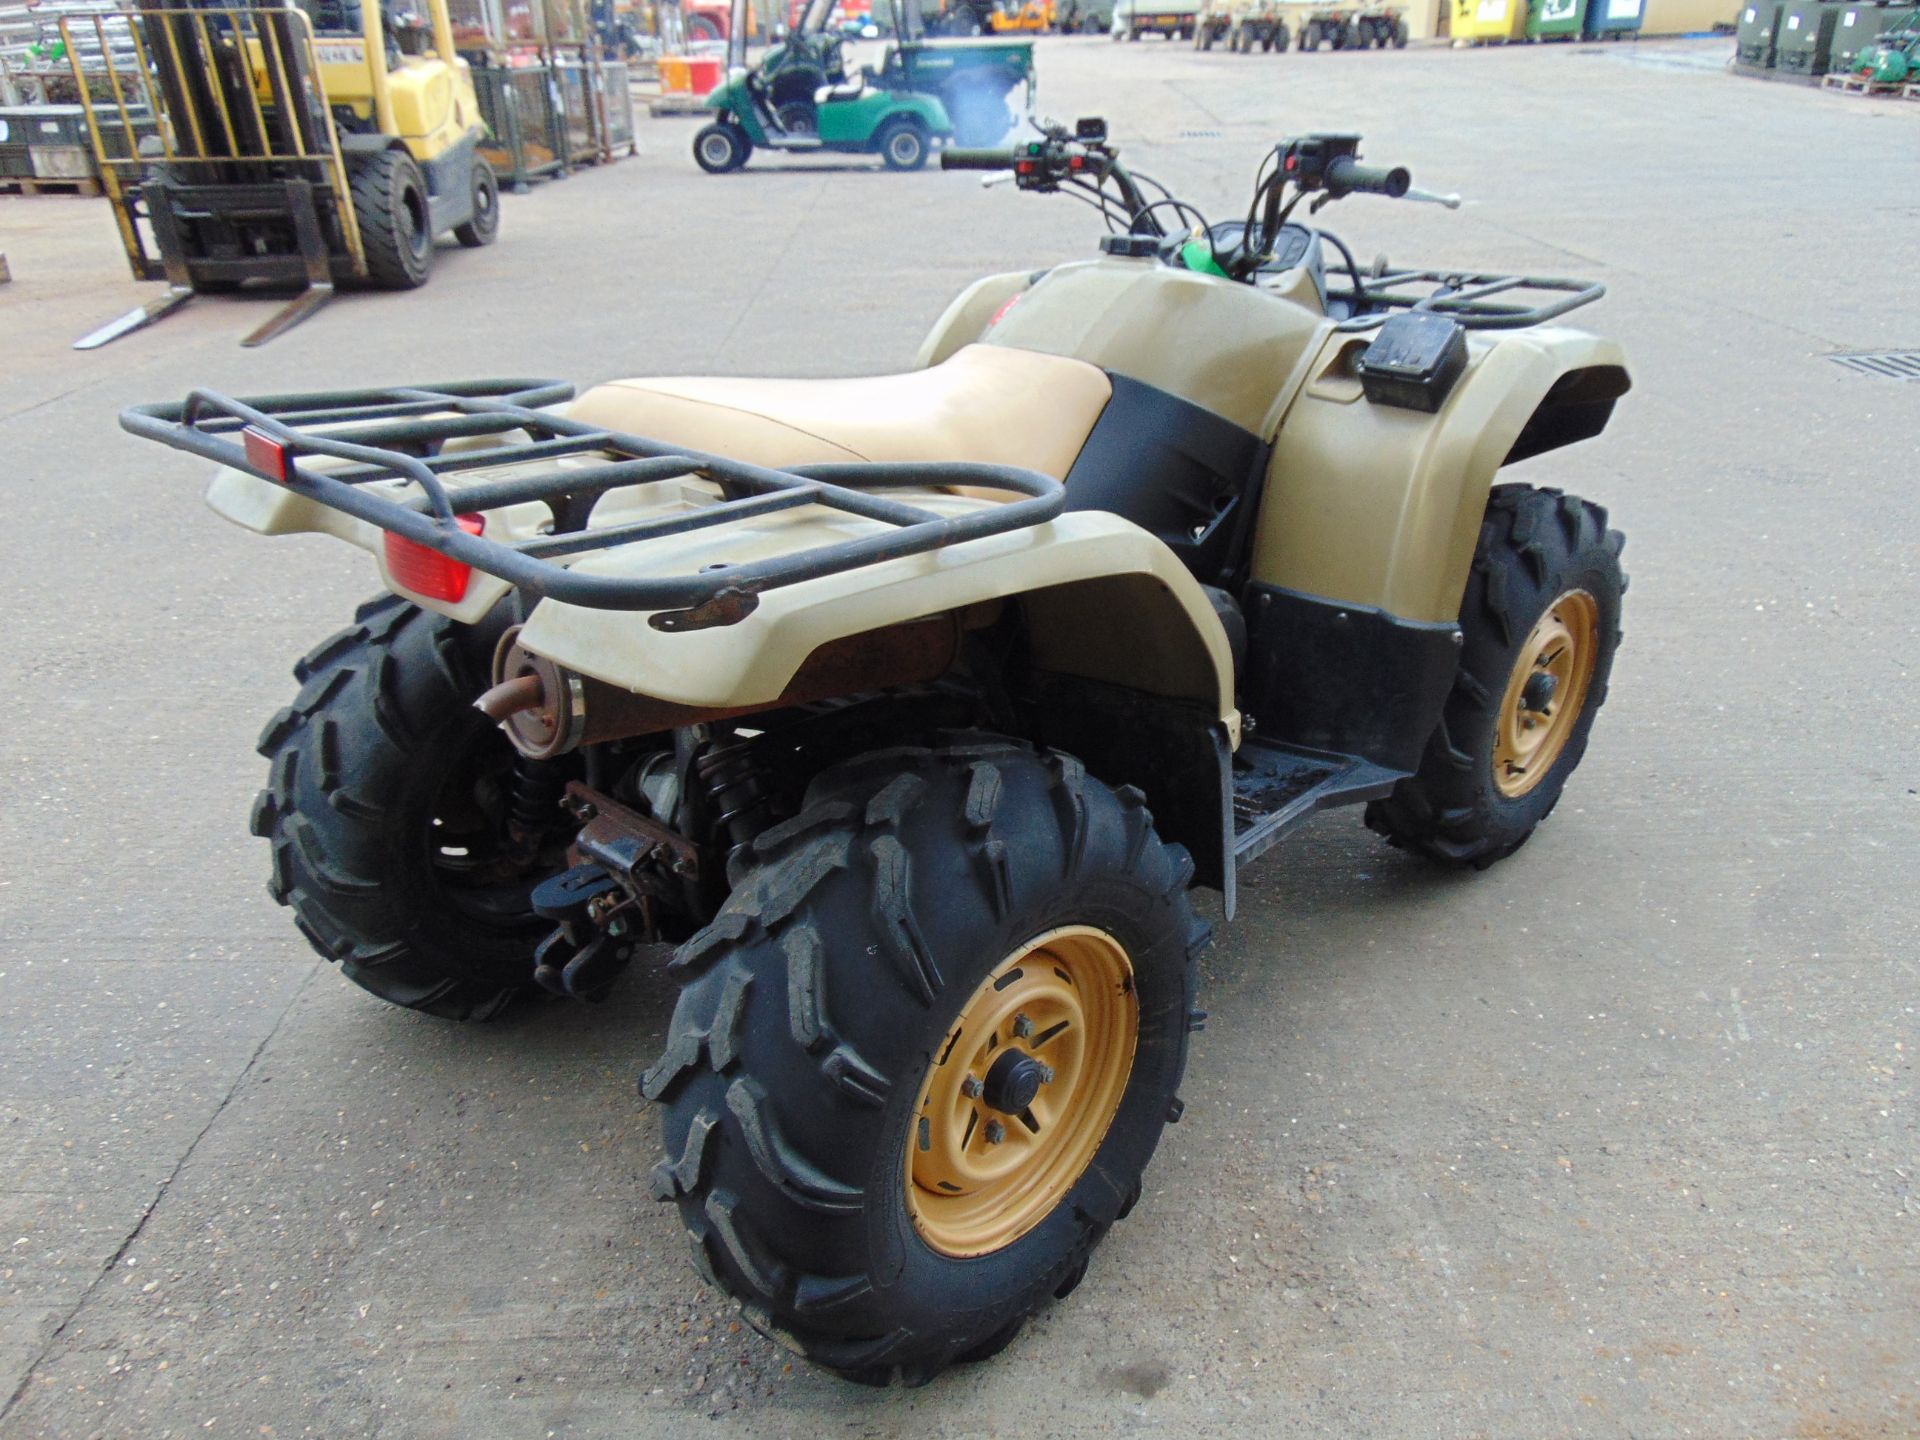 Recent Release Military Specification Yamaha Grizzly 450 4 x 4 ATV Quad Bike ONLY 59 HOURS!!! - Image 7 of 20